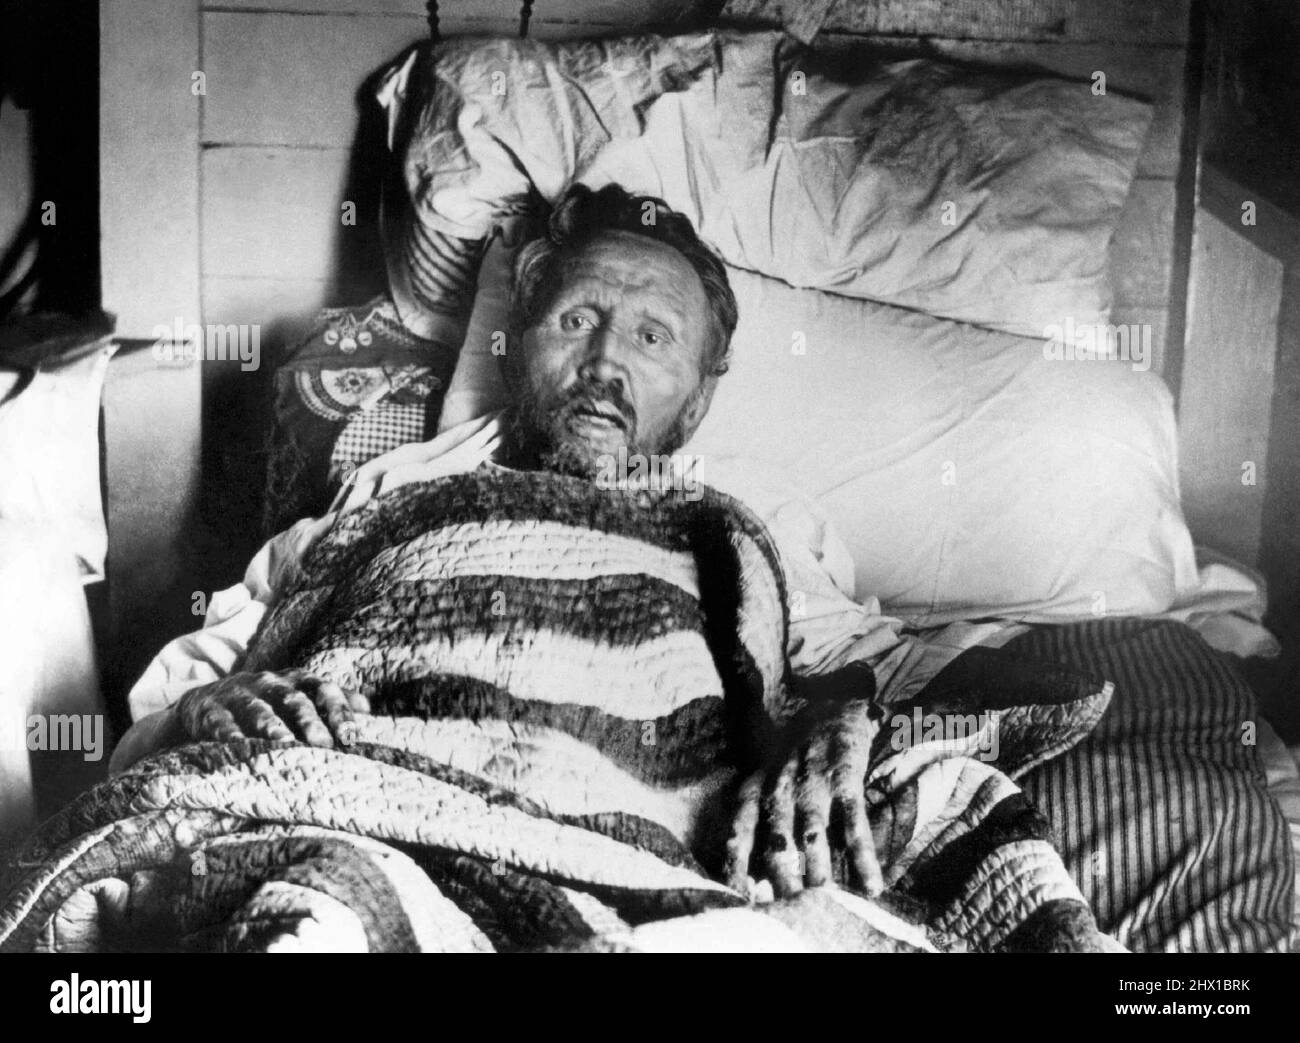 Father Damien (1840–1889), Roman Catholic missionary to lepers on the island of Molokai in the Sandwich (Hawaiian) Islands, on his deathbed after contracting leprosy from the people to whom he ministered. Photo presumably taken by Dr. Sydney B. Swift on Palm Sunday, April 14, 1889, the day before Damien died. Stock Photo